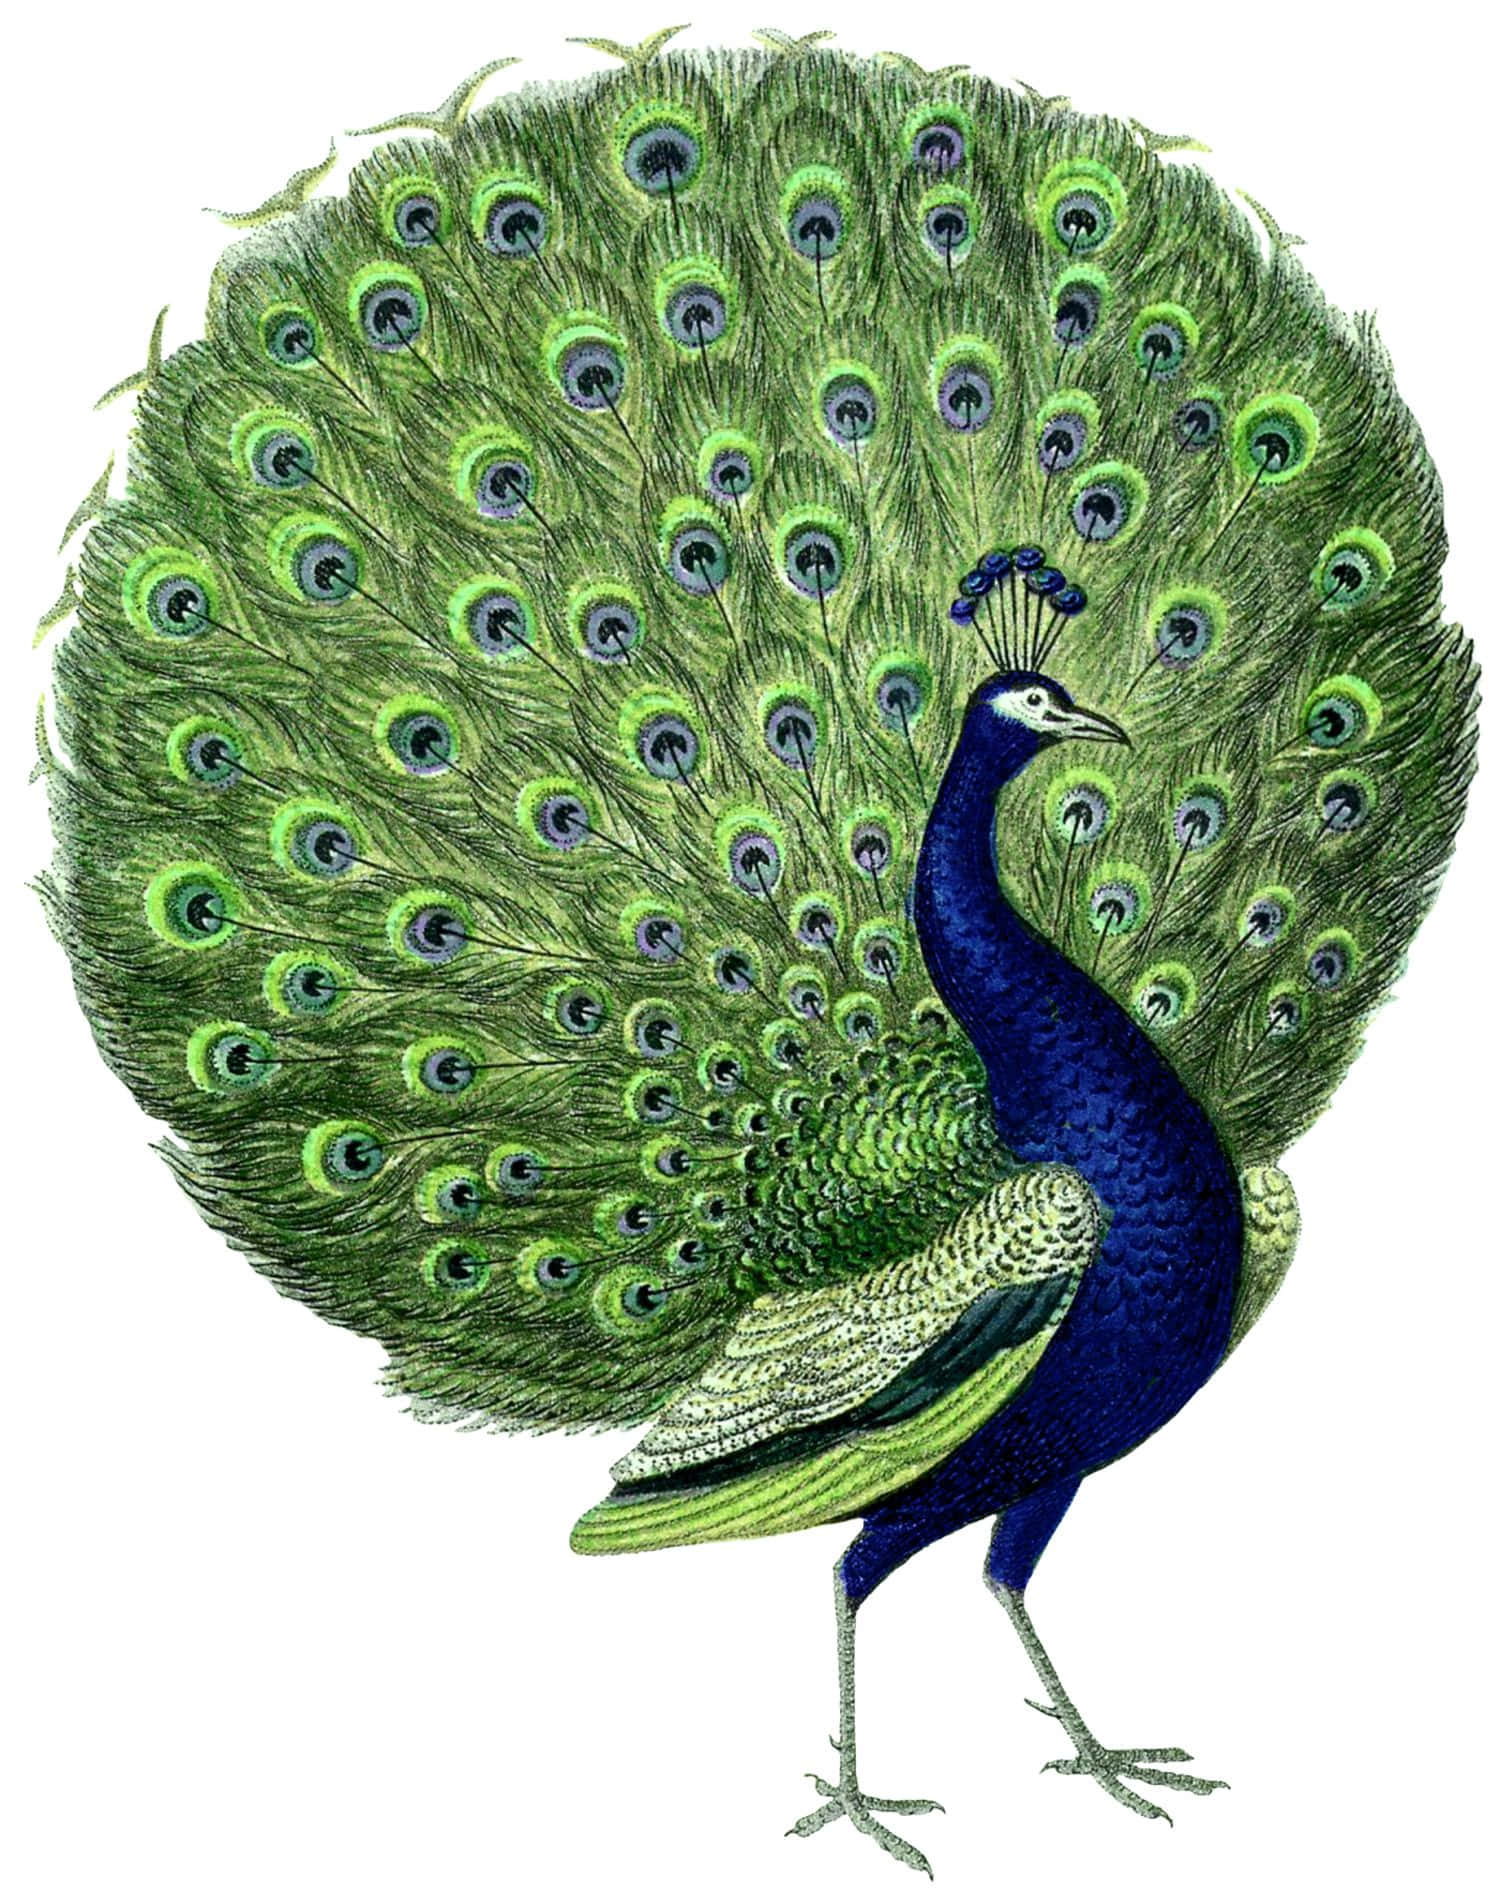 A beautiful peacock showcases its colorful plumes